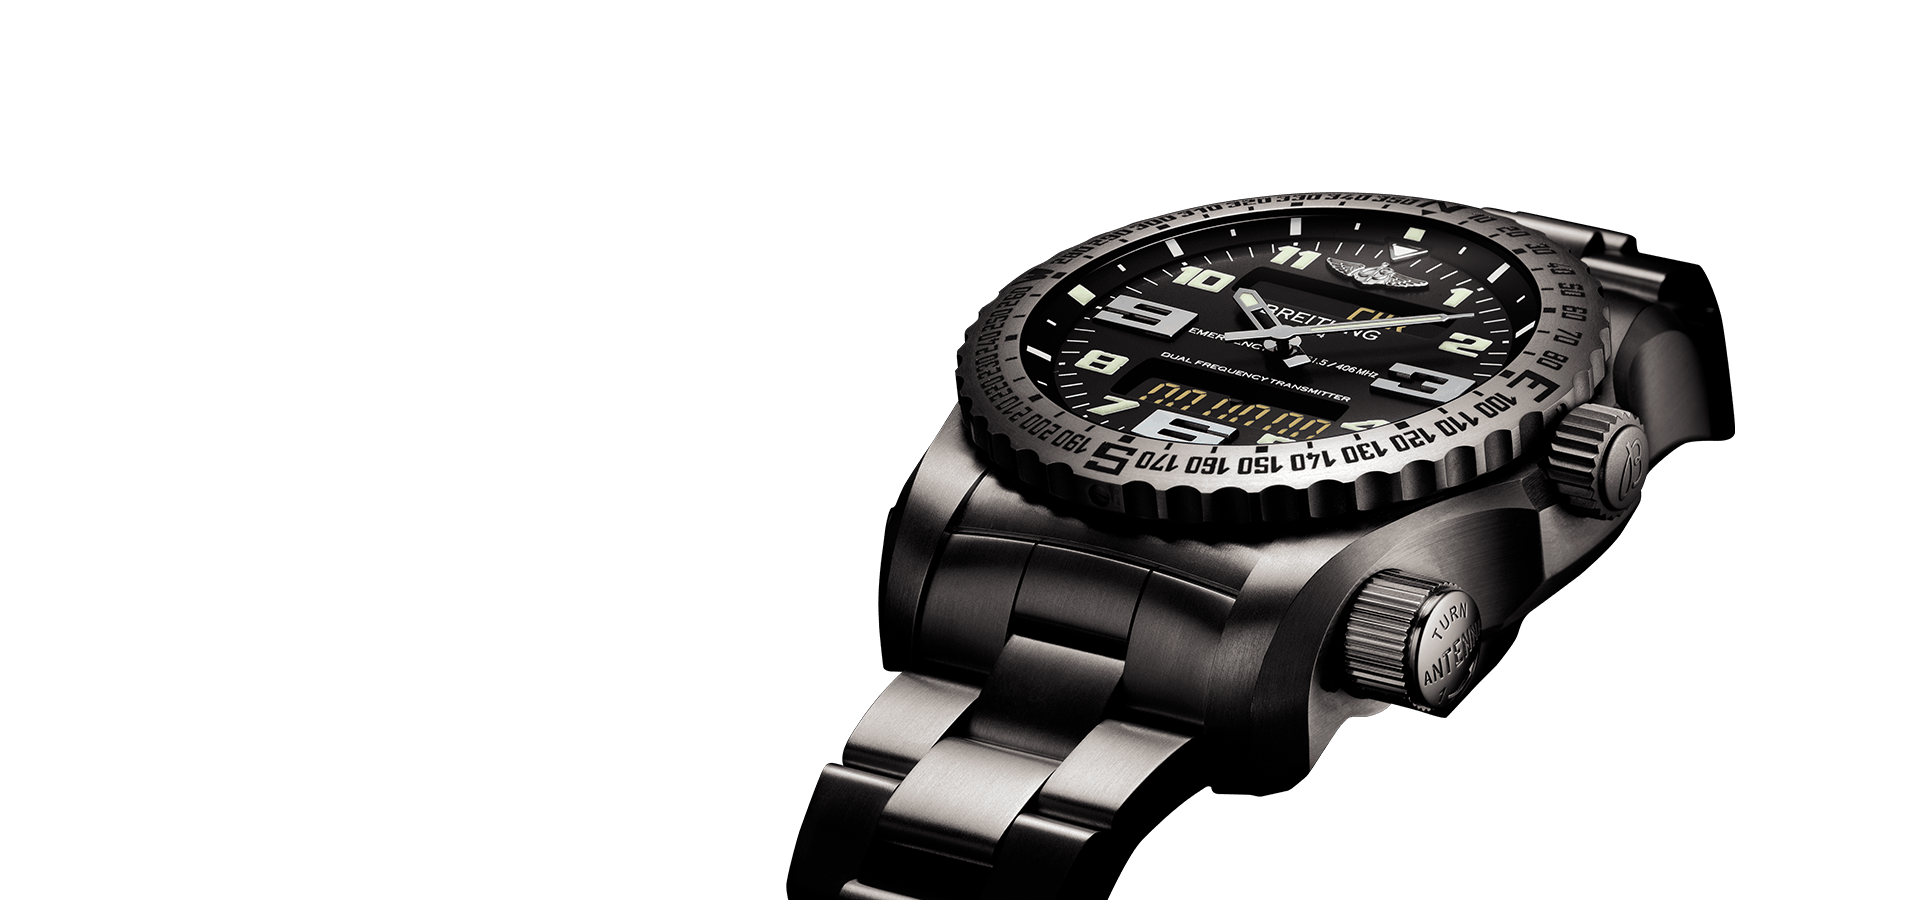 The breitling Bentley car T steel in a black leather strap with a grey dial